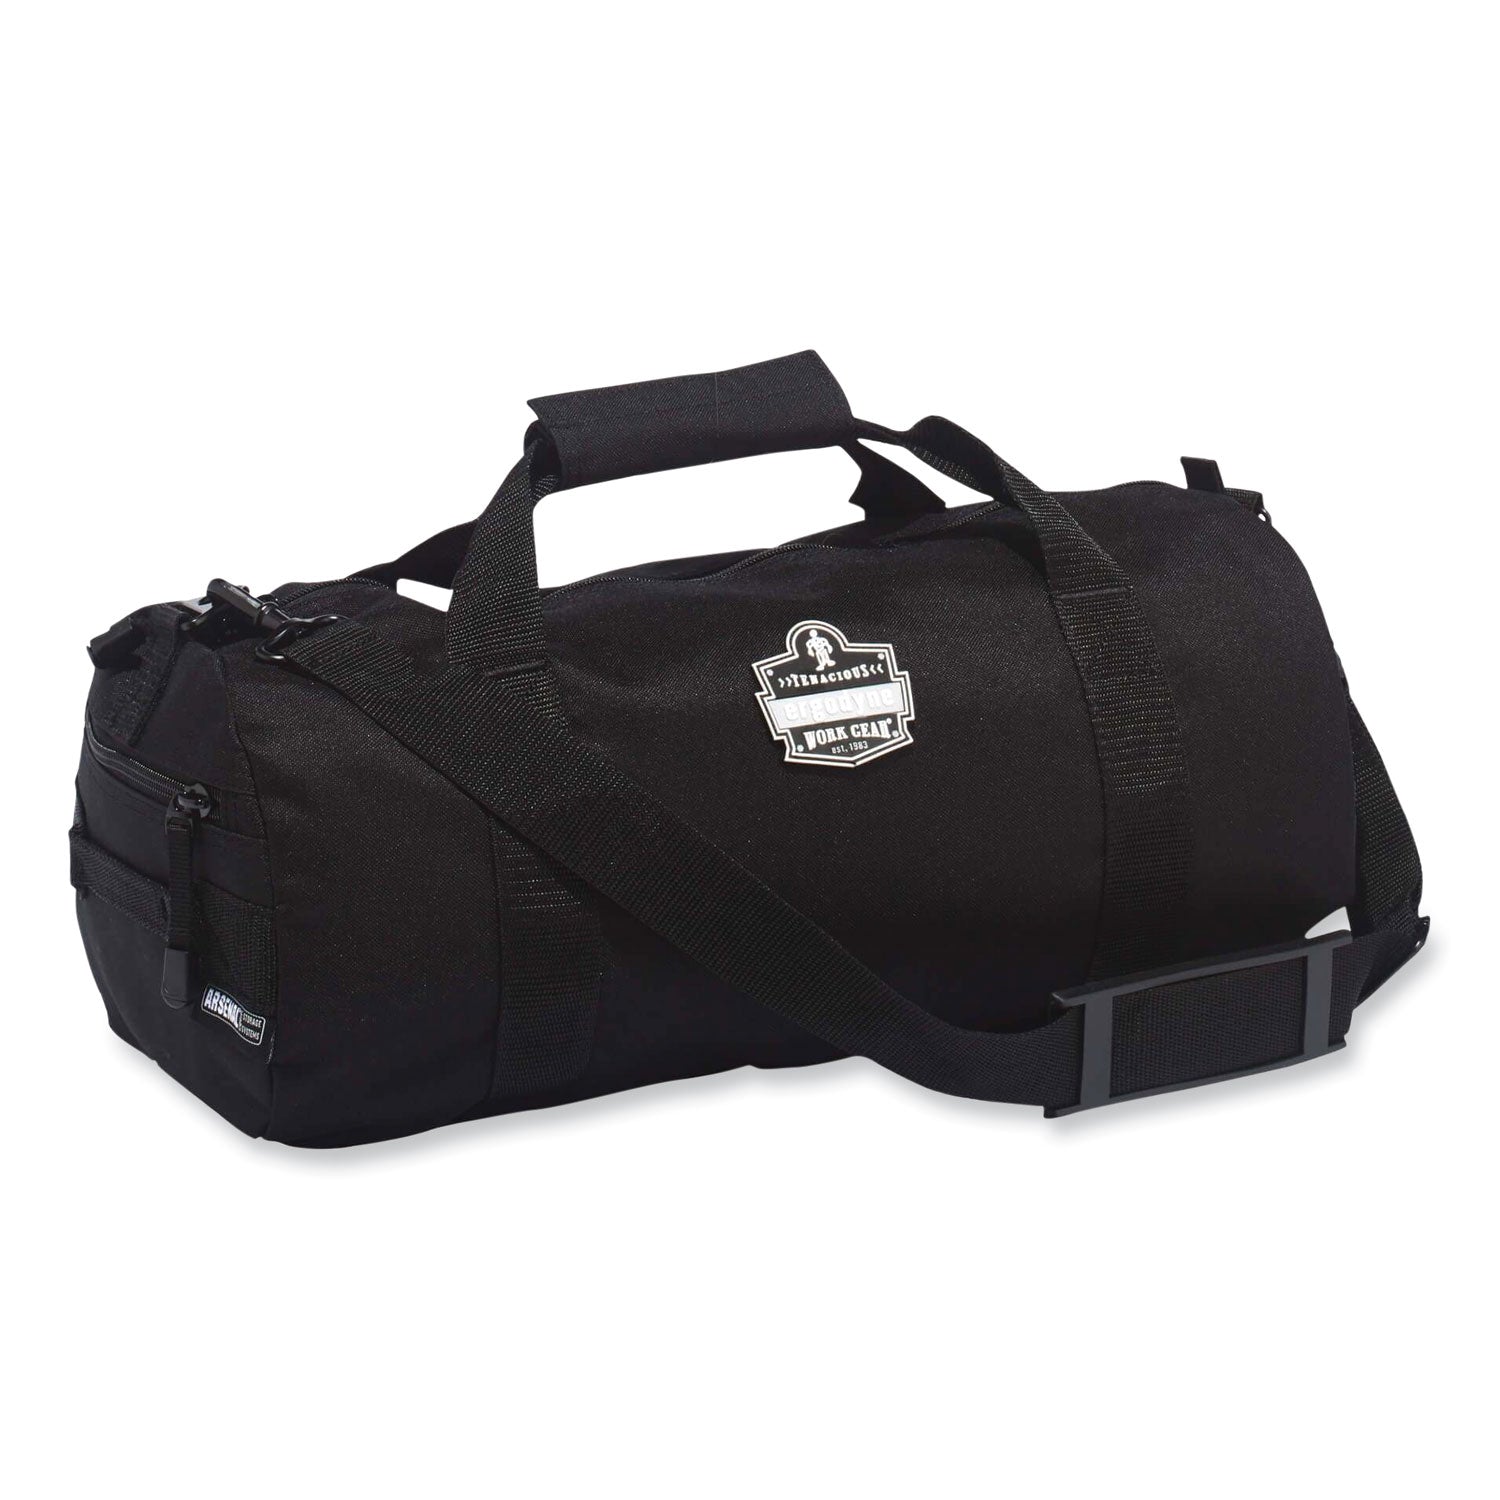 arsenal-5020p-gear-duffel-bag-polyester-extra-small-9-x-18-x-9-black-ships-in-1-3-business-days_ego13319 - 1